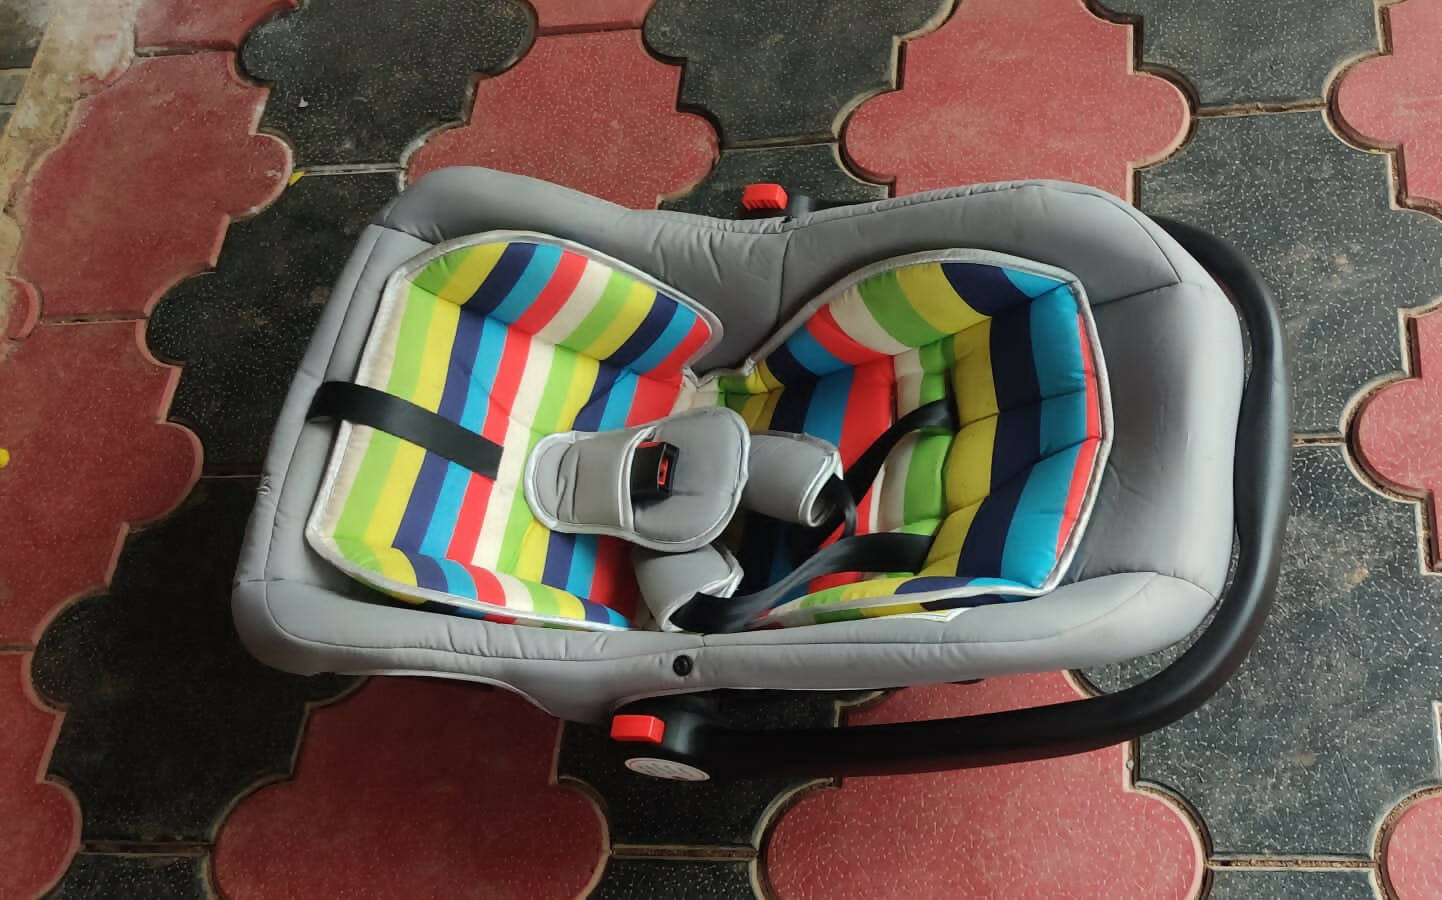 R FOR RABBIT Picaboo Car Seat